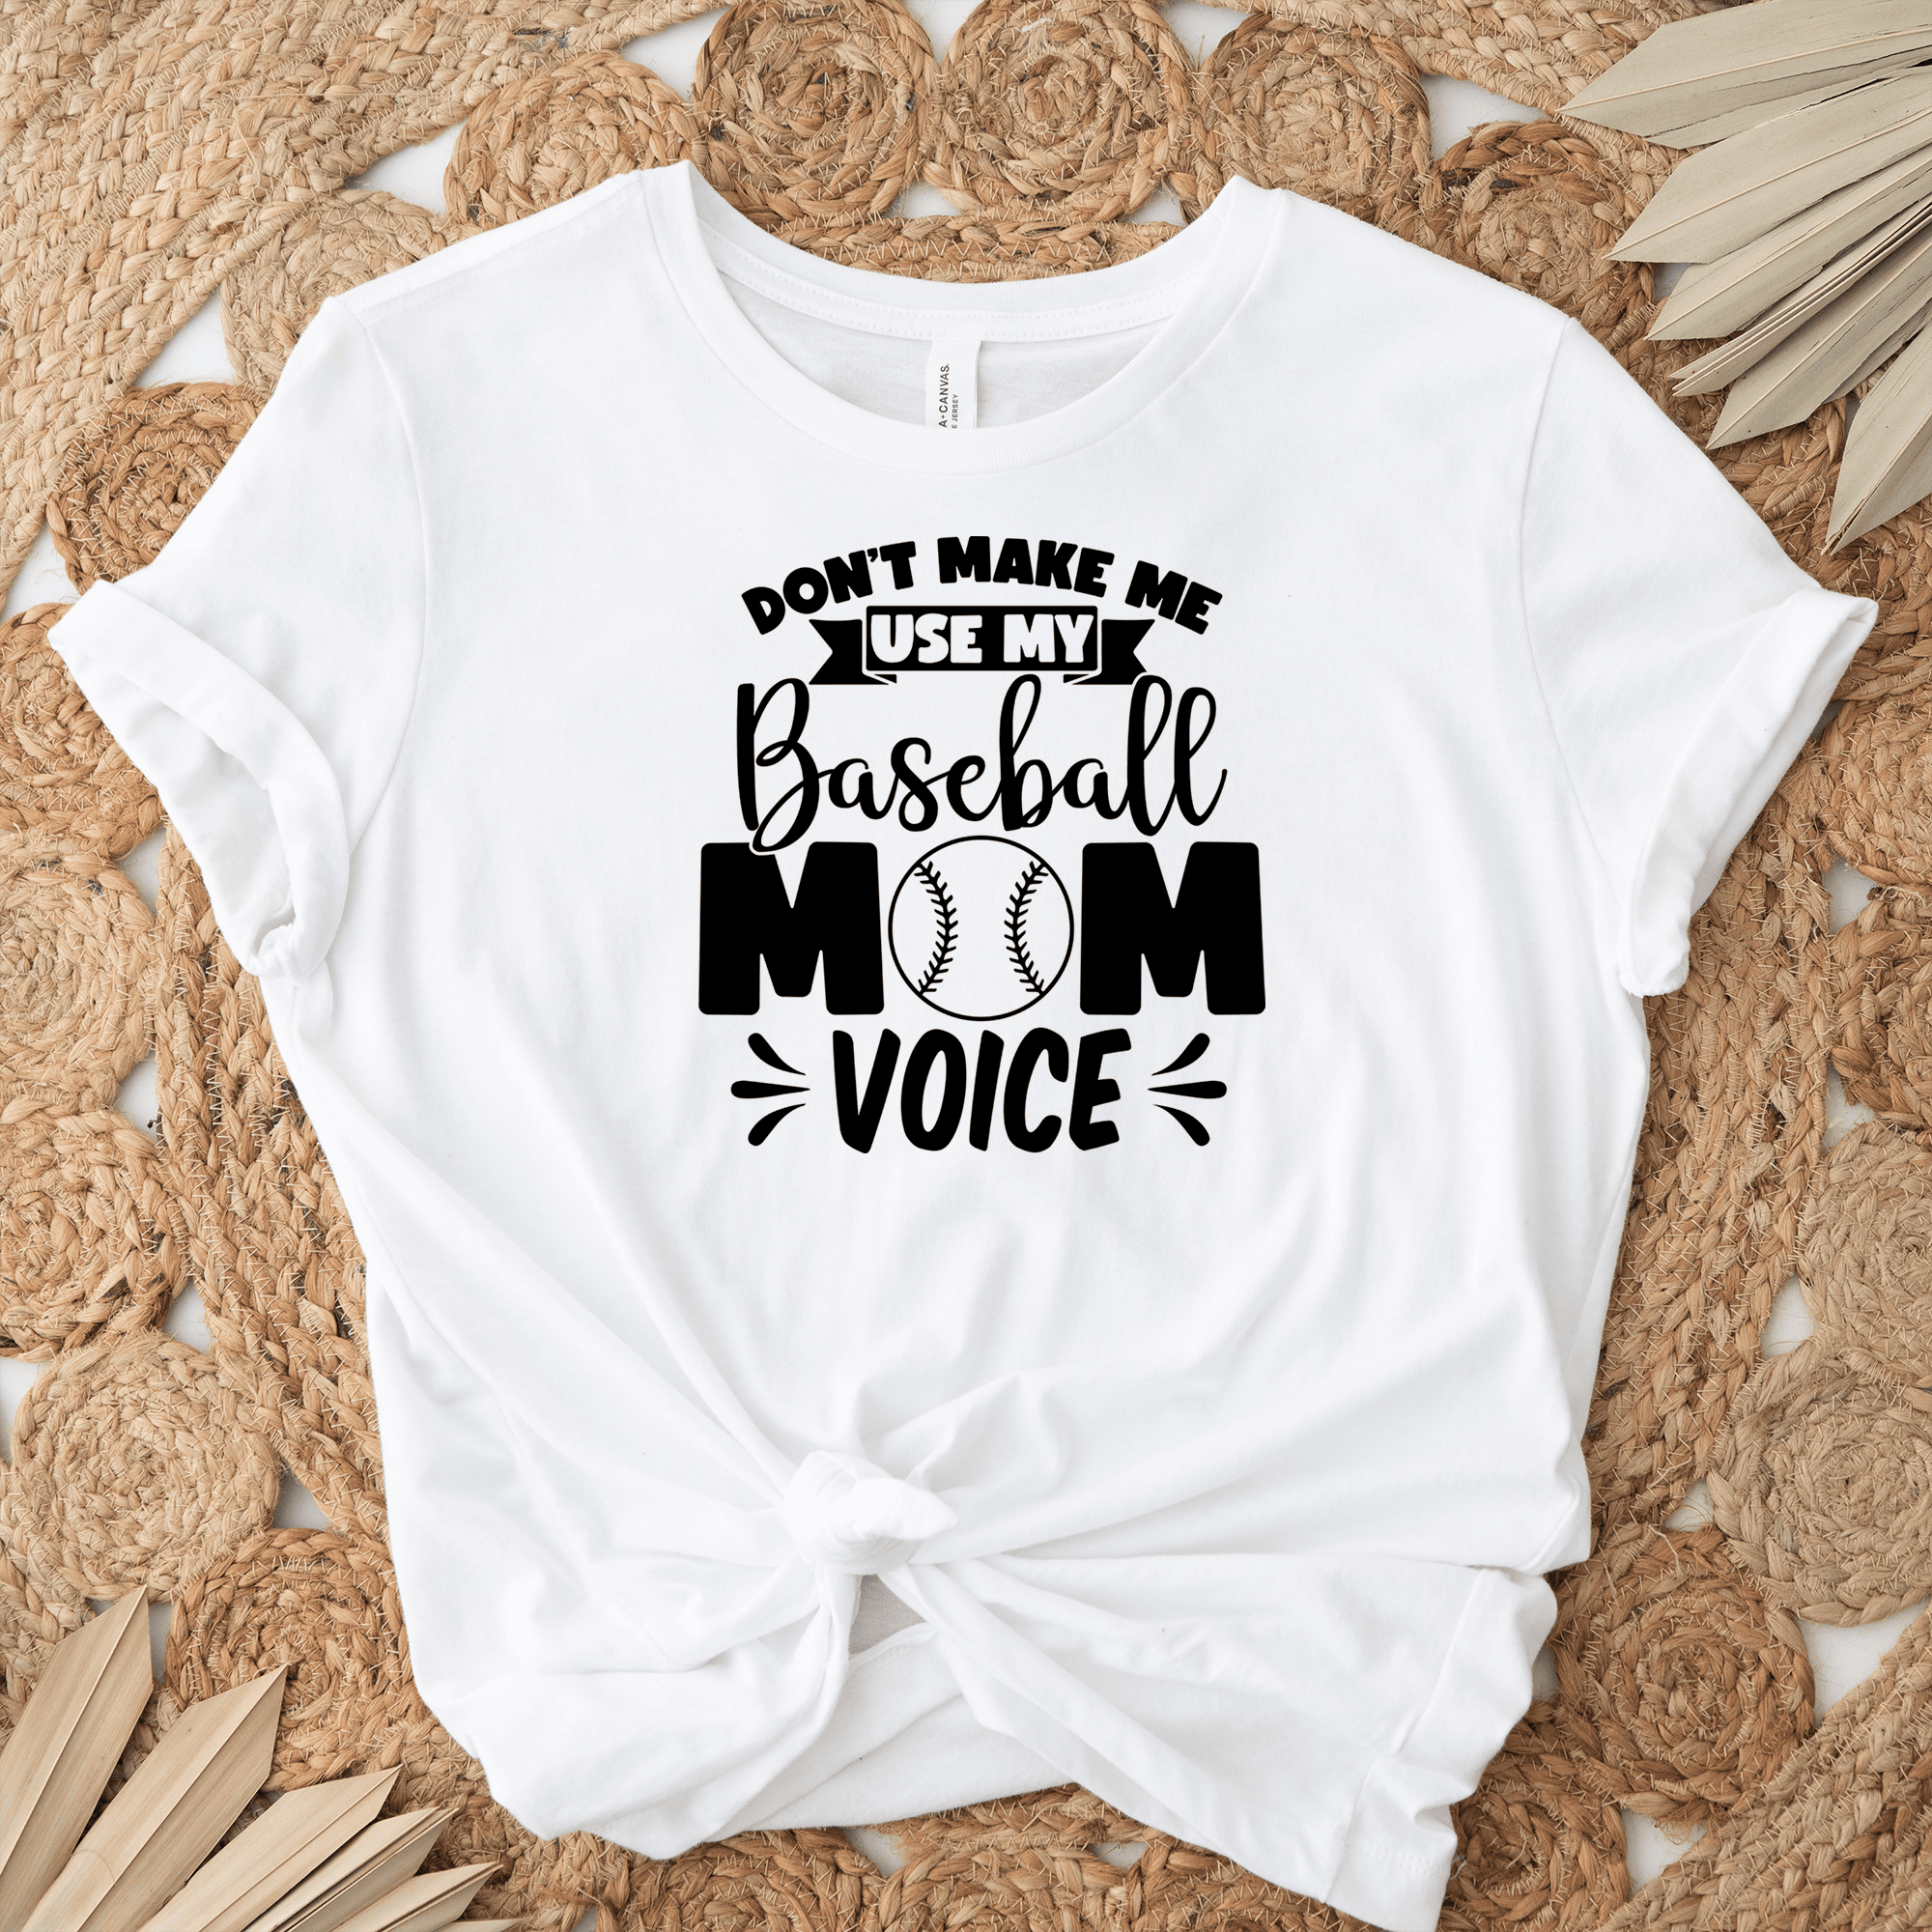 Womens White T Shirt with Ill-Use-My-Baseball-Mom-Voice design